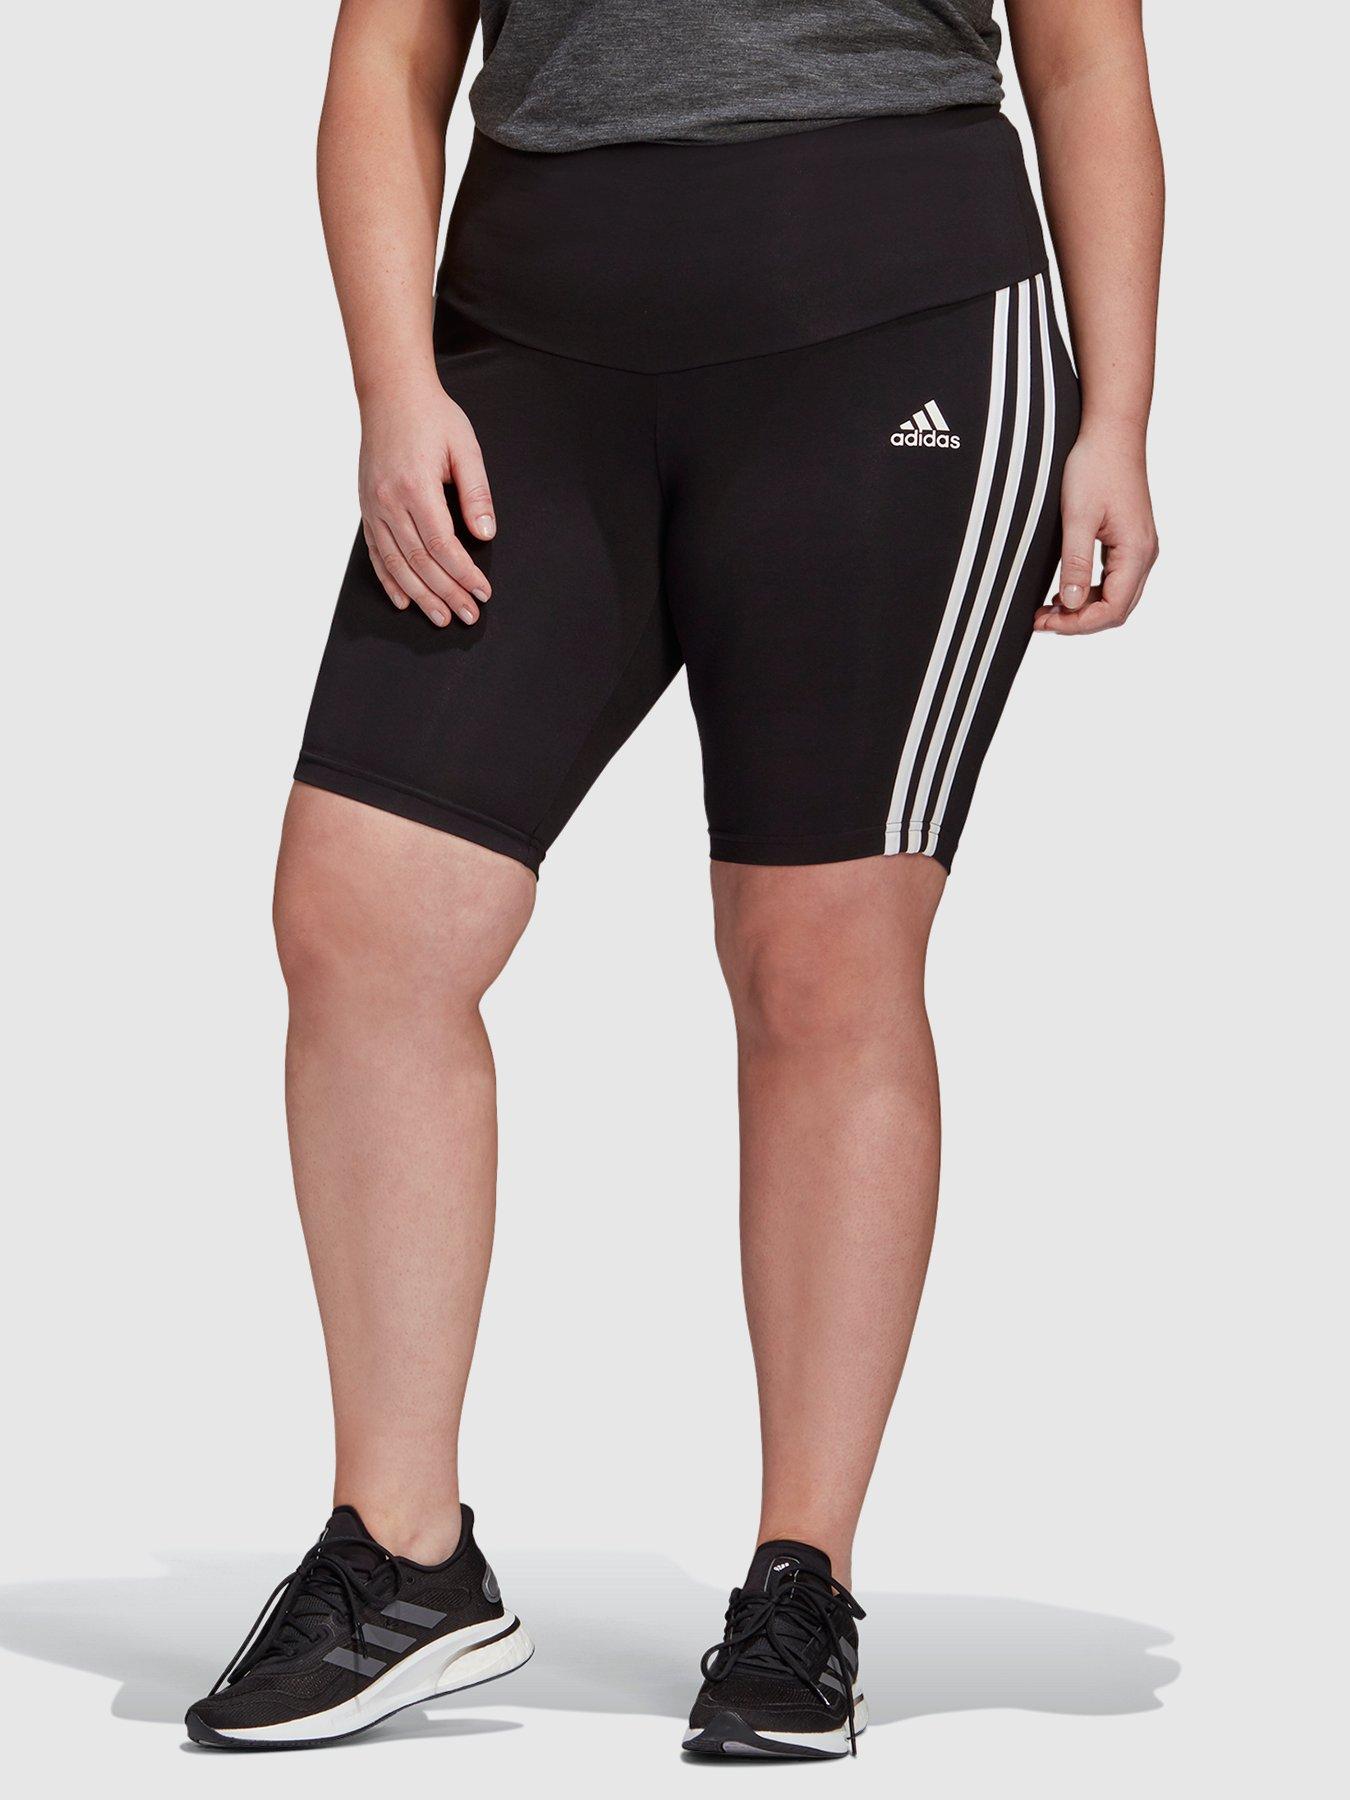 adidas Mh Cycling Shorts - Plus Size 